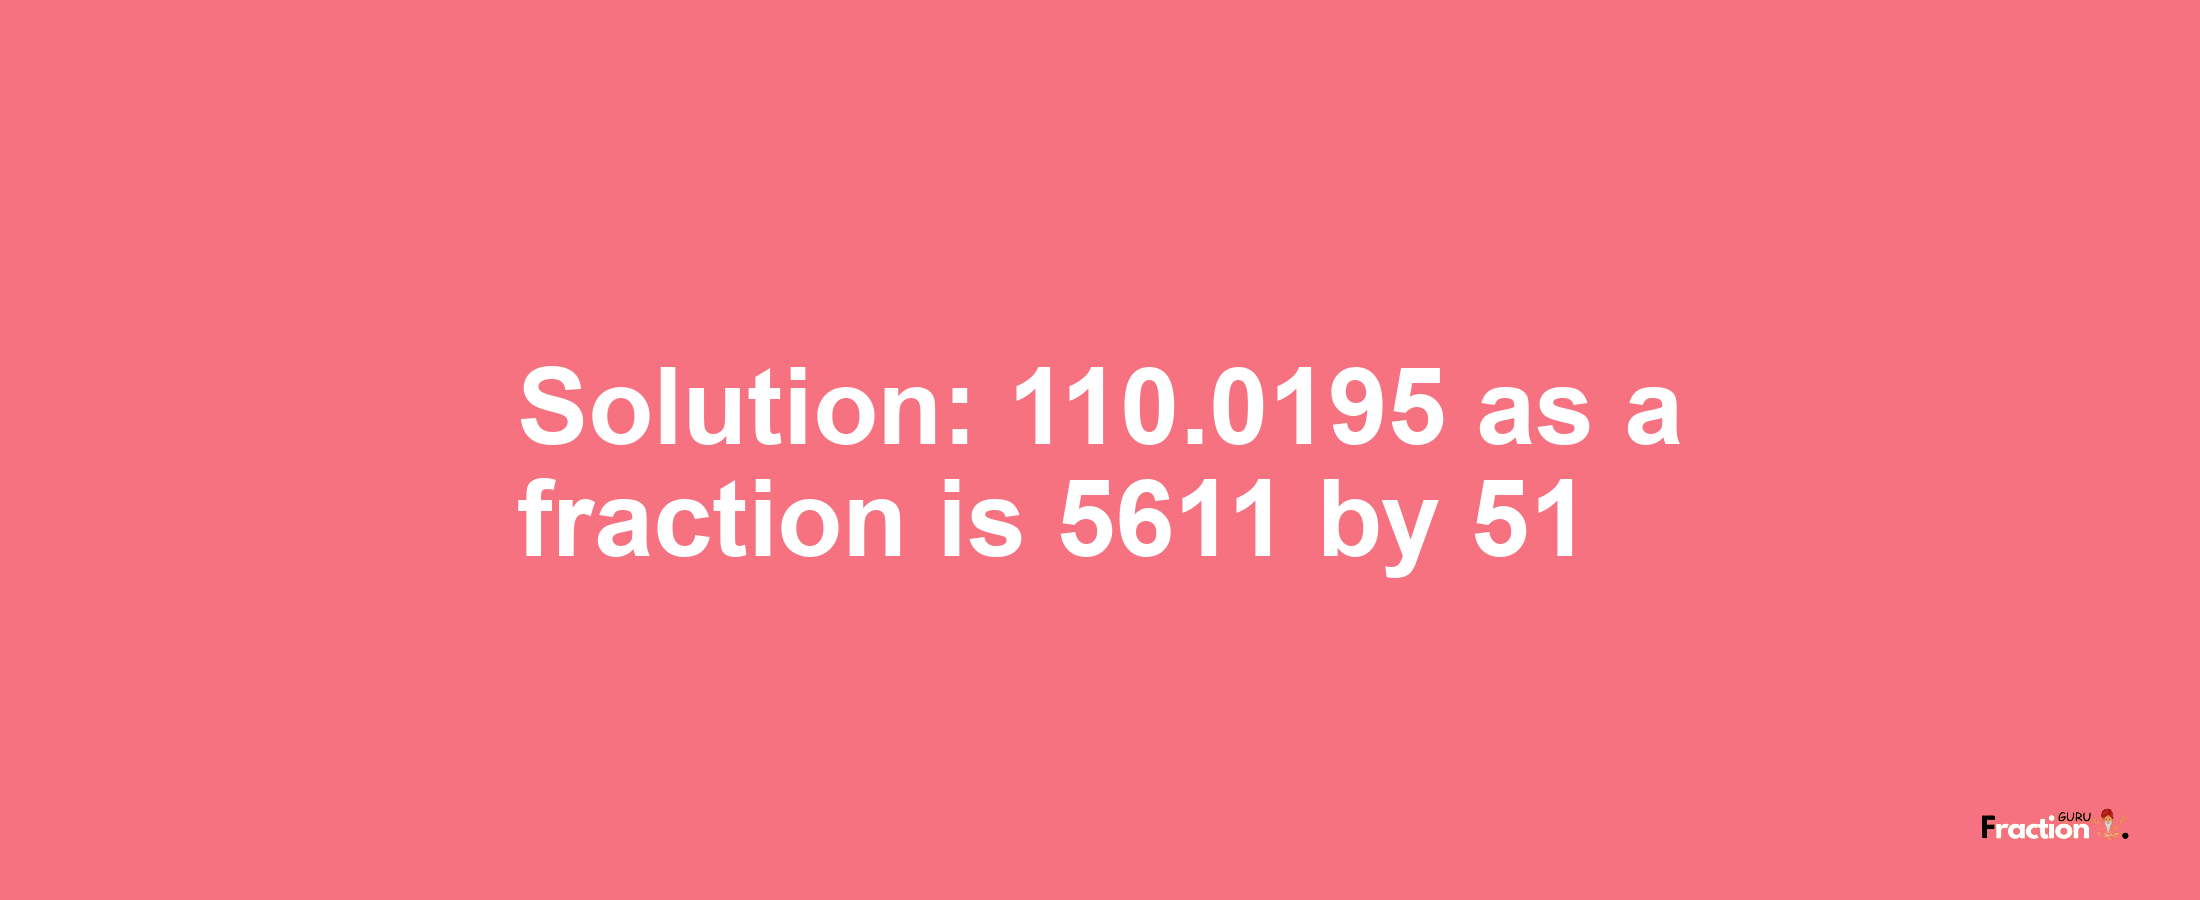 Solution:110.0195 as a fraction is 5611/51